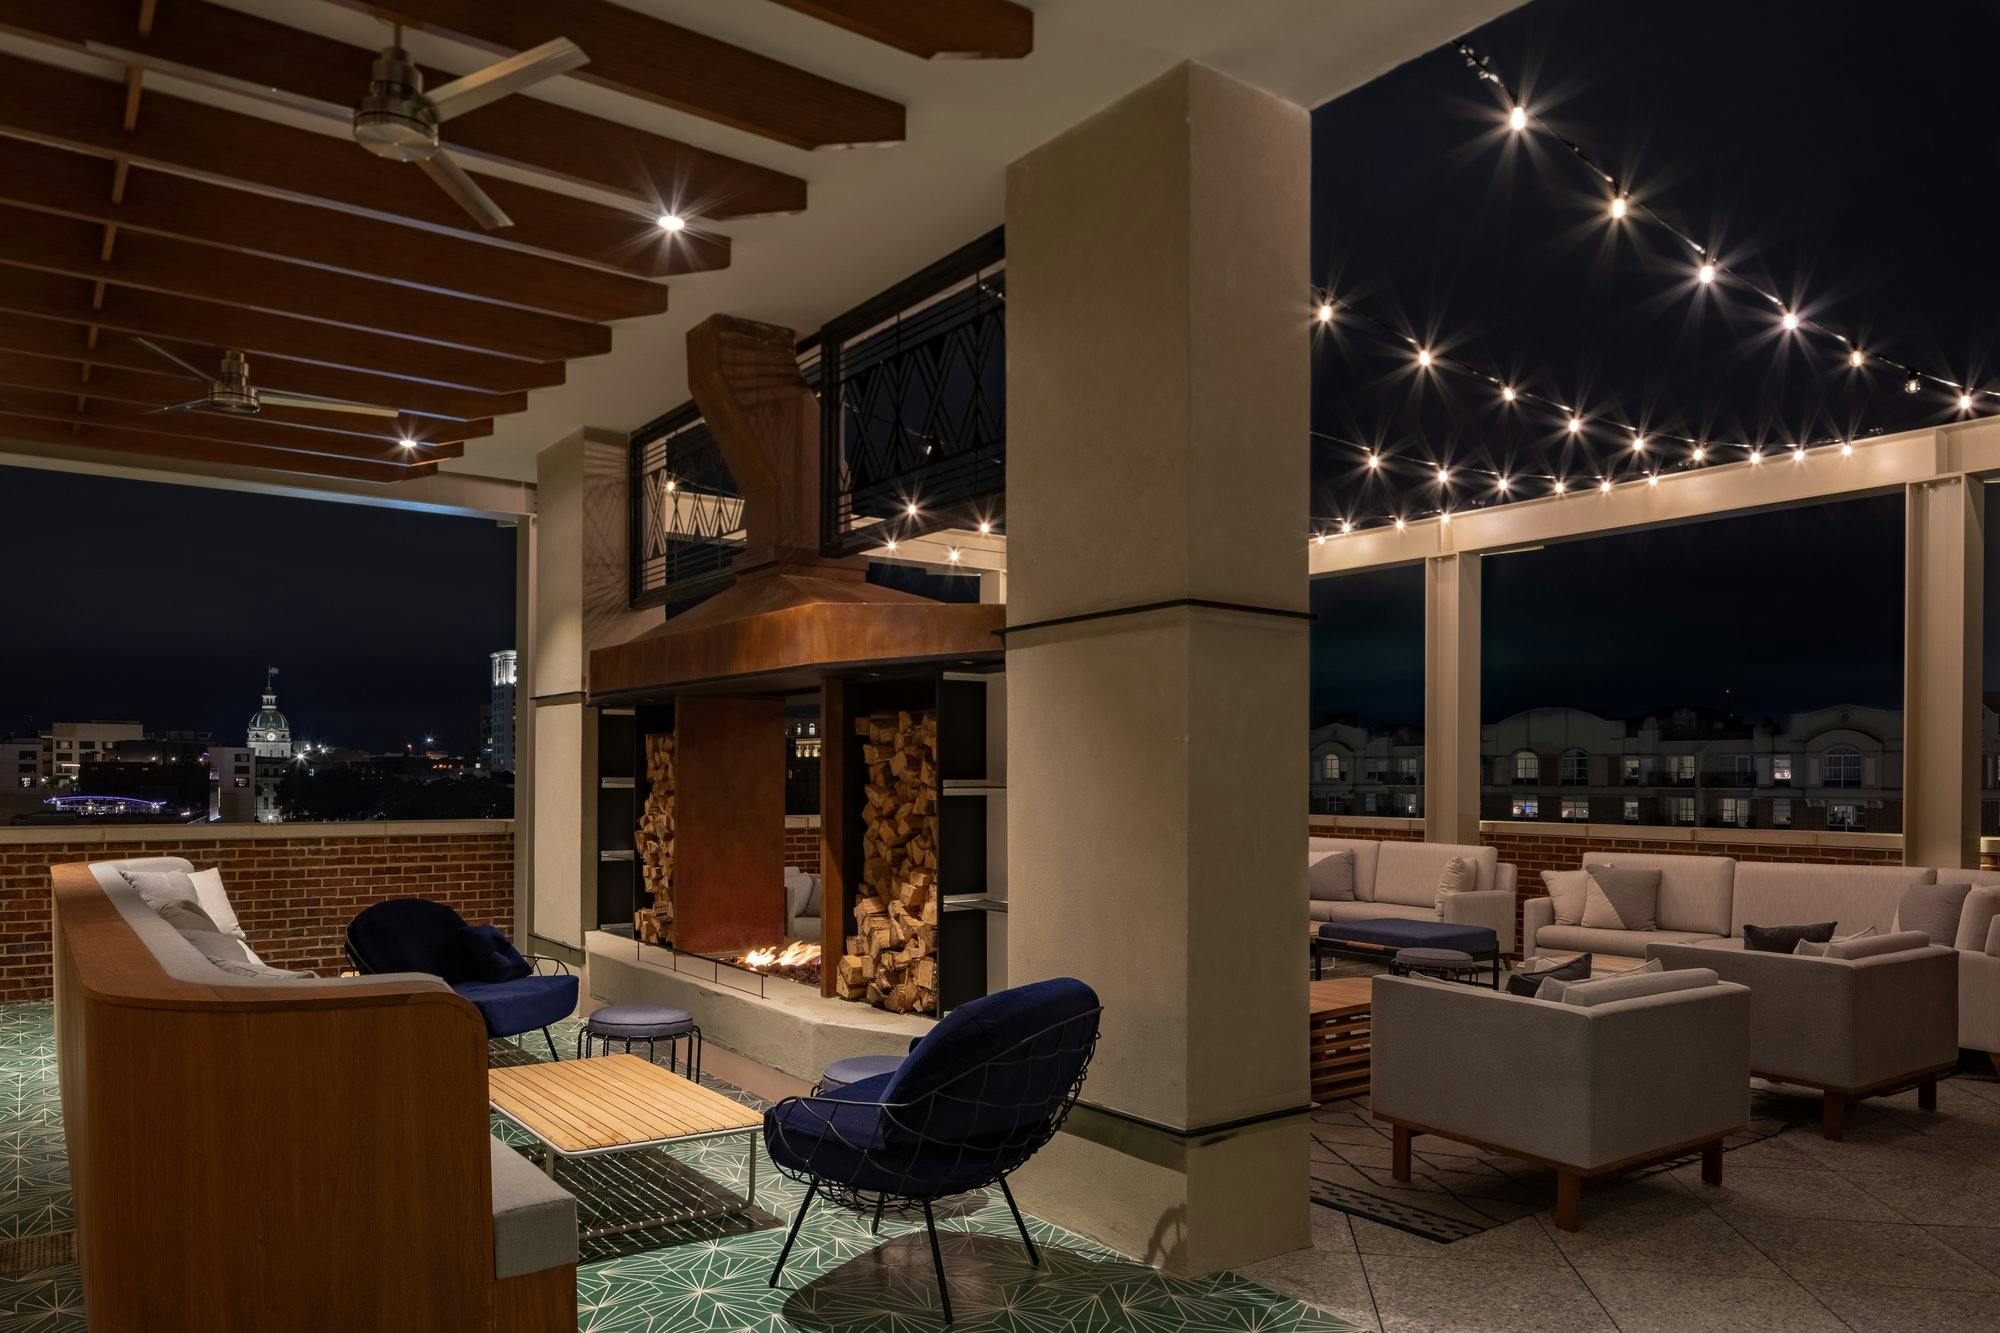 Dimly lit rooftop patio at night with a centrally located fireplace and a variety of couches and chairs.